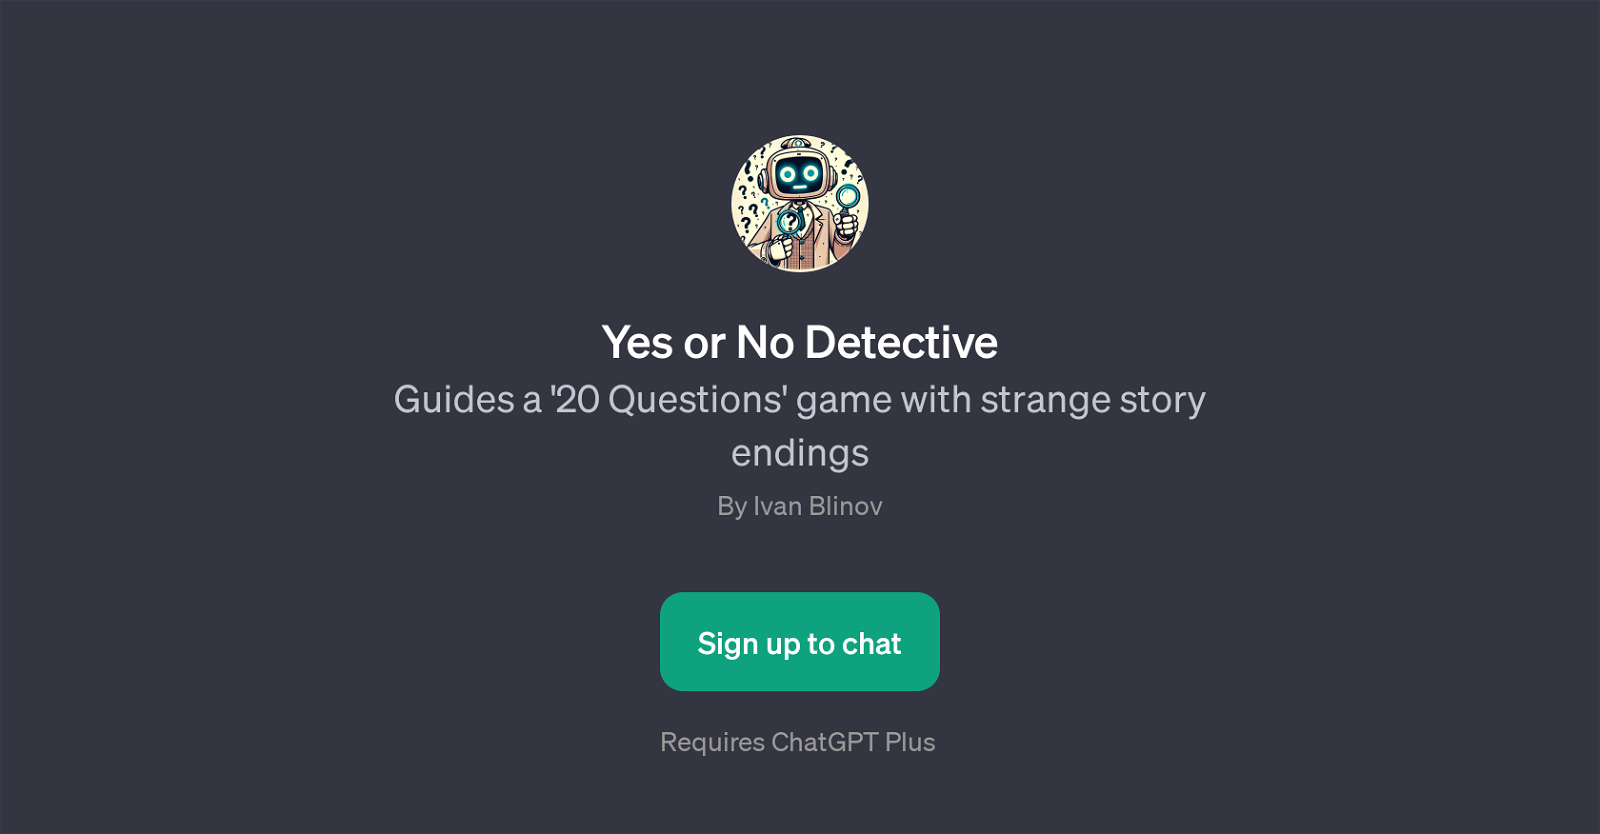 Yes or No Detective website